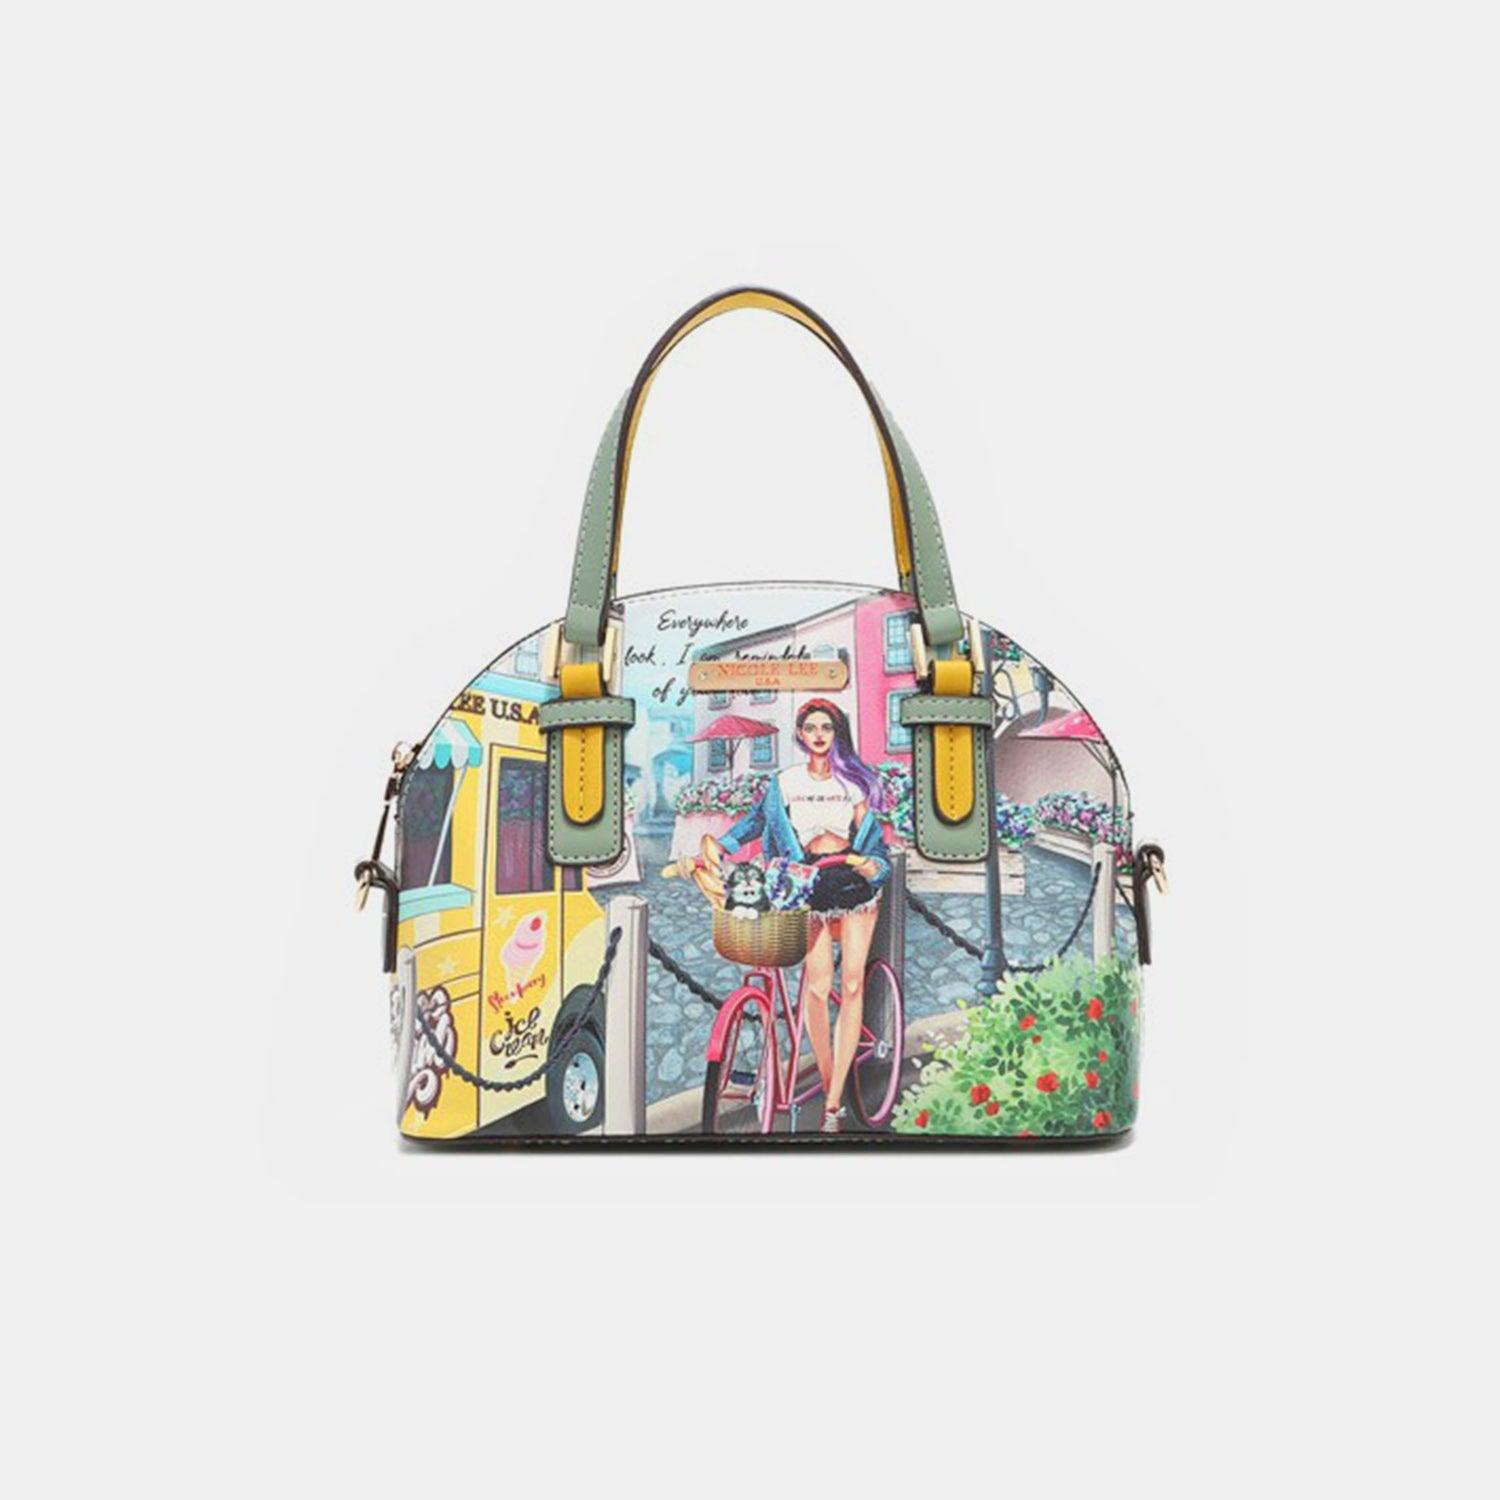 a handbag with a picture of a woman on a bike